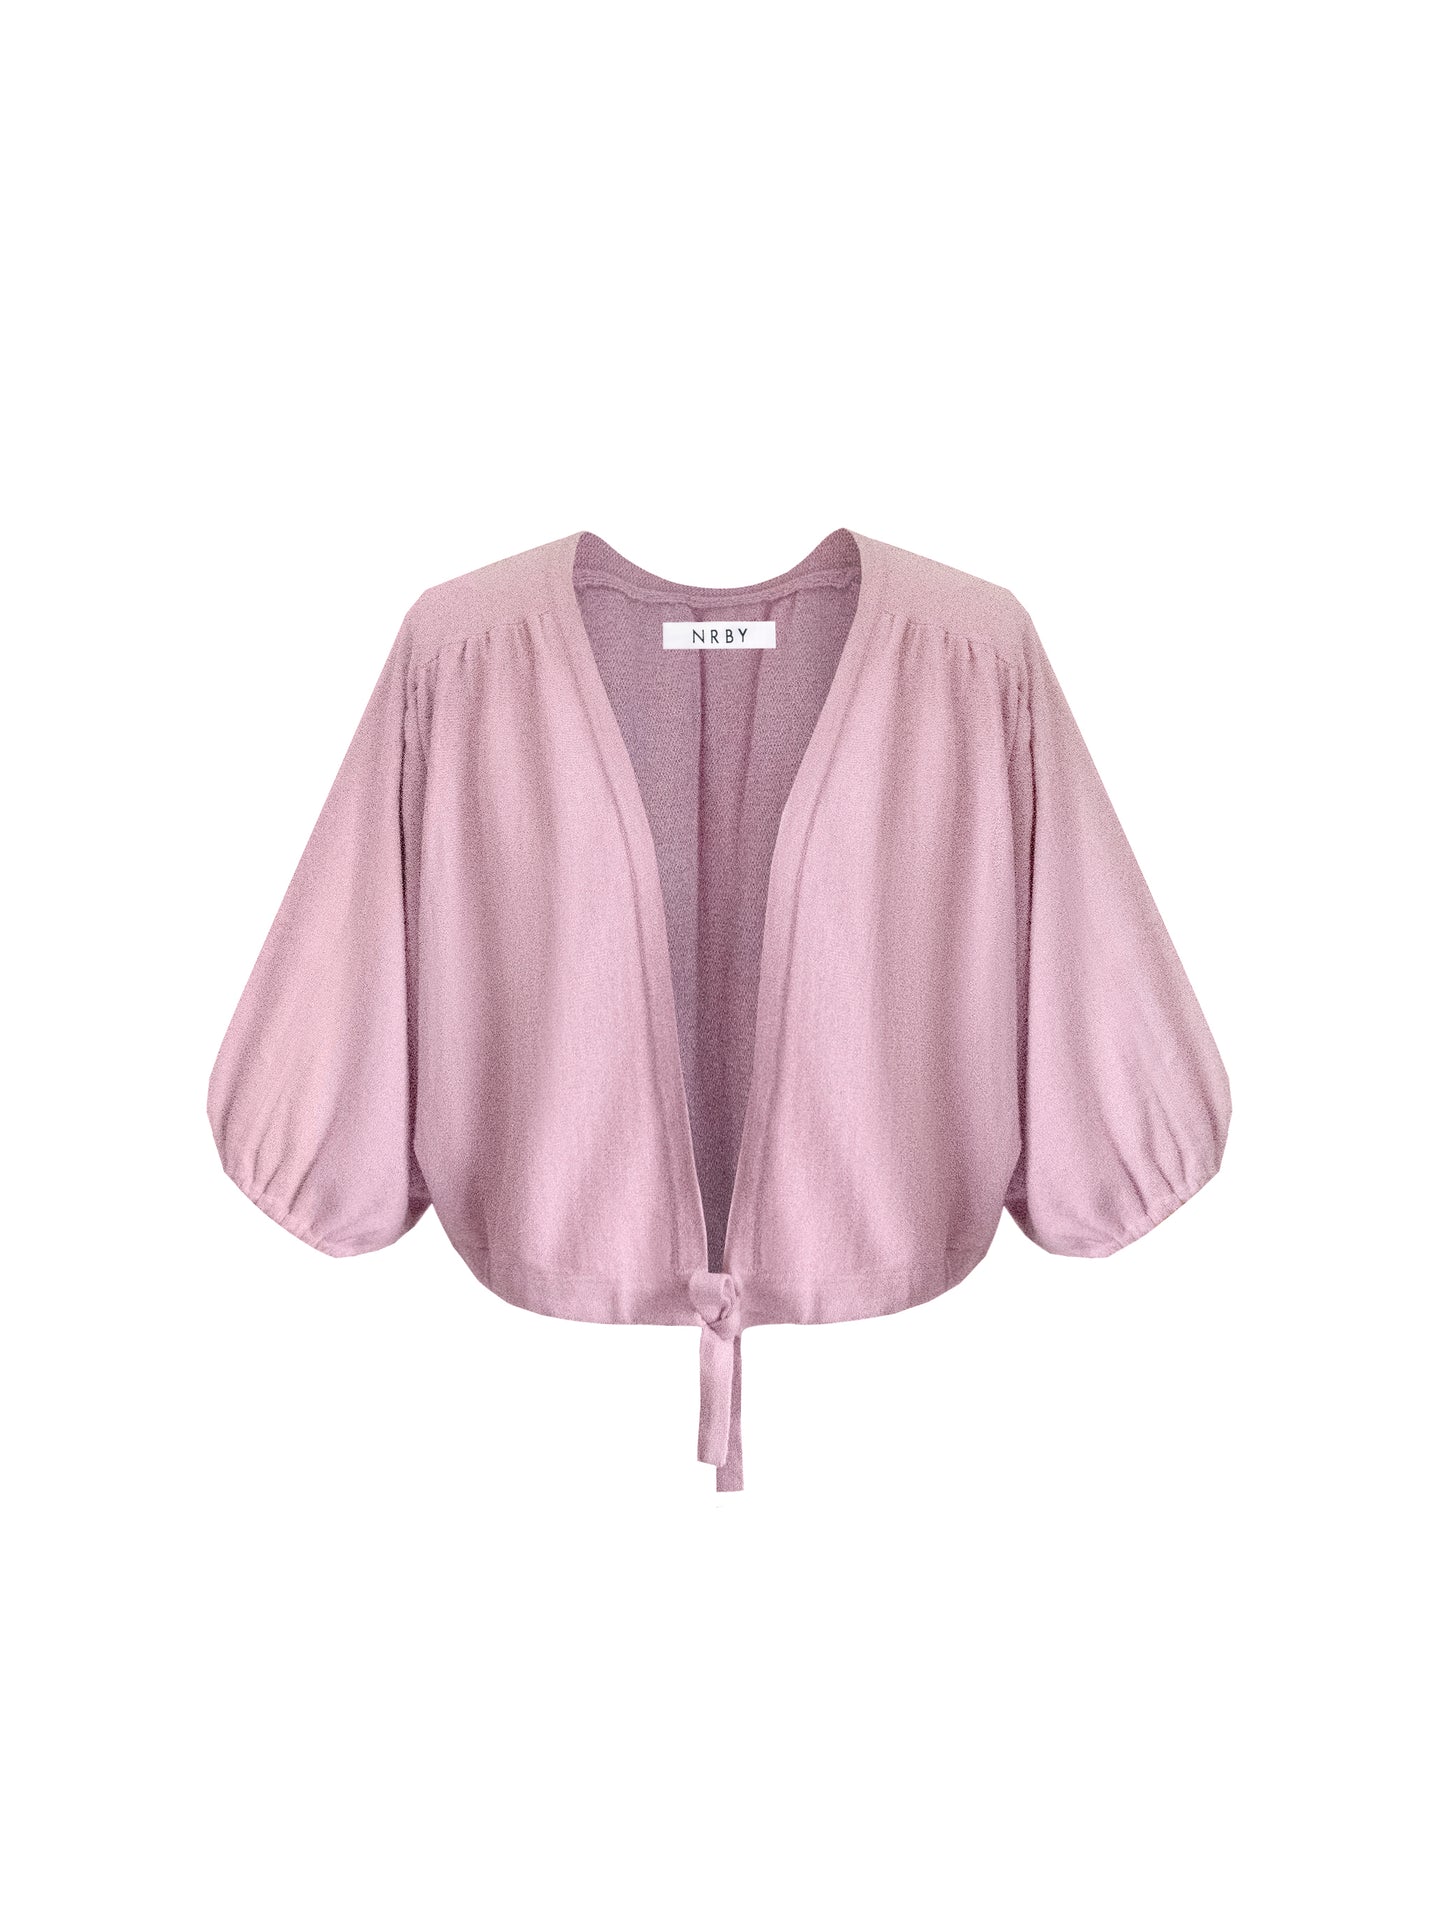 Manon tie front cardigan with gathered sleeve